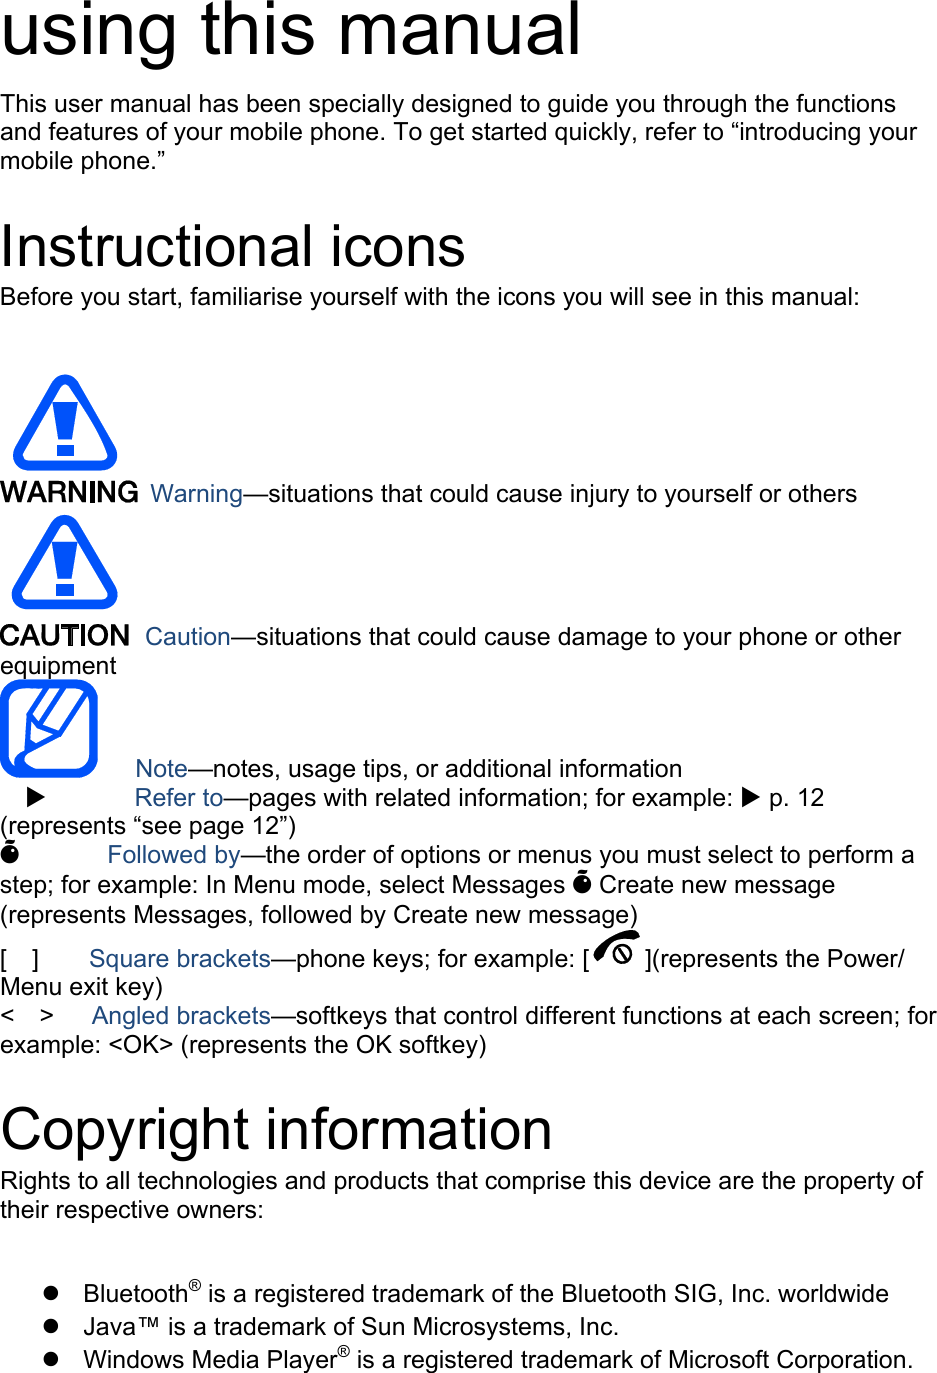 using this manual This user manual has been specially designed to guide you through the functions and features of your mobile phone. To get started quickly, refer to “introducing your mobile phone.”  Instructional icons Before you start, familiarise yourself with the icons you will see in this manual:     Warning—situations that could cause injury to yourself or others  Caution—situations that could cause damage to your phone or other equipment    Note—notes, usage tips, or additional information   X       Refer to—pages with related information; for example: X p. 12 (represents “see page 12”) Õ       Followed by—the order of options or menus you must select to perform a step; for example: In Menu mode, select Messages Õ Create new message (represents Messages, followed by Create new message) [  ]    Square brackets—phone keys; for example: [ ](represents the Power/ Menu exit key) &lt;  &gt;   Angled brackets—softkeys that control different functions at each screen; for example: &lt;OK&gt; (represents the OK softkey)  Copyright information Rights to all technologies and products that comprise this device are the property of their respective owners:  z Bluetooth® is a registered trademark of the Bluetooth SIG, Inc. worldwide z  Java™ is a trademark of Sun Microsystems, Inc. z Windows Media Player® is a registered trademark of Microsoft Corporation. 